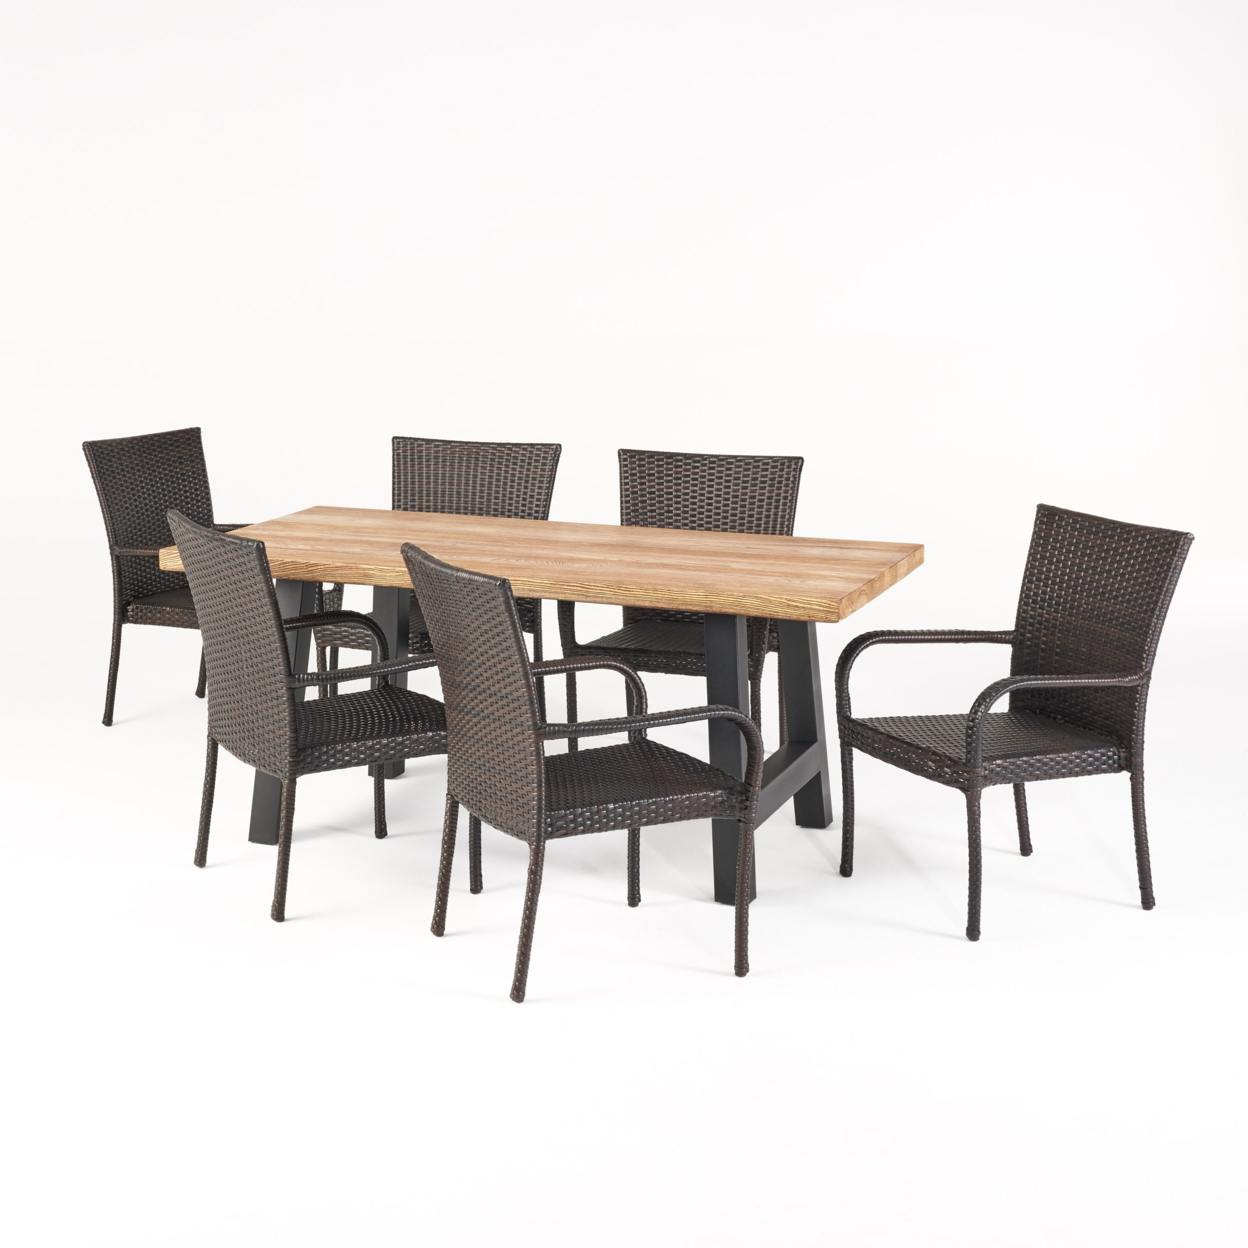 Morrison Outdoor 7 Piece Stacking Wicker Dining Set With Light Weight Concrete Table